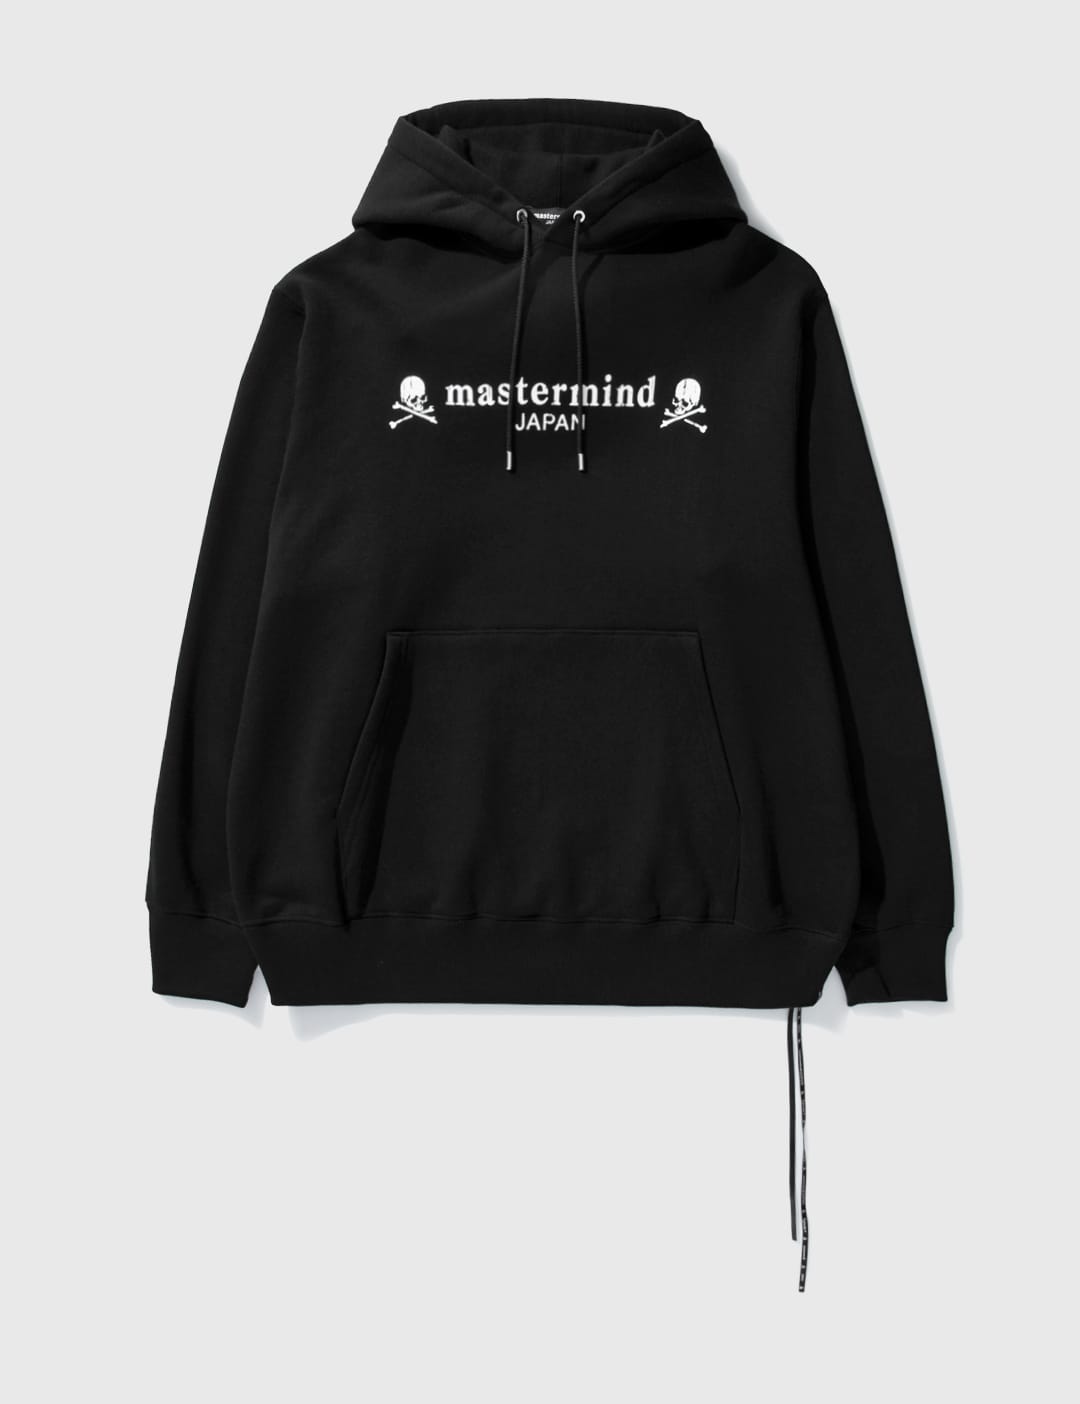 Mastermind Japan | HBX - Globally Curated Fashion and Lifestyle by 